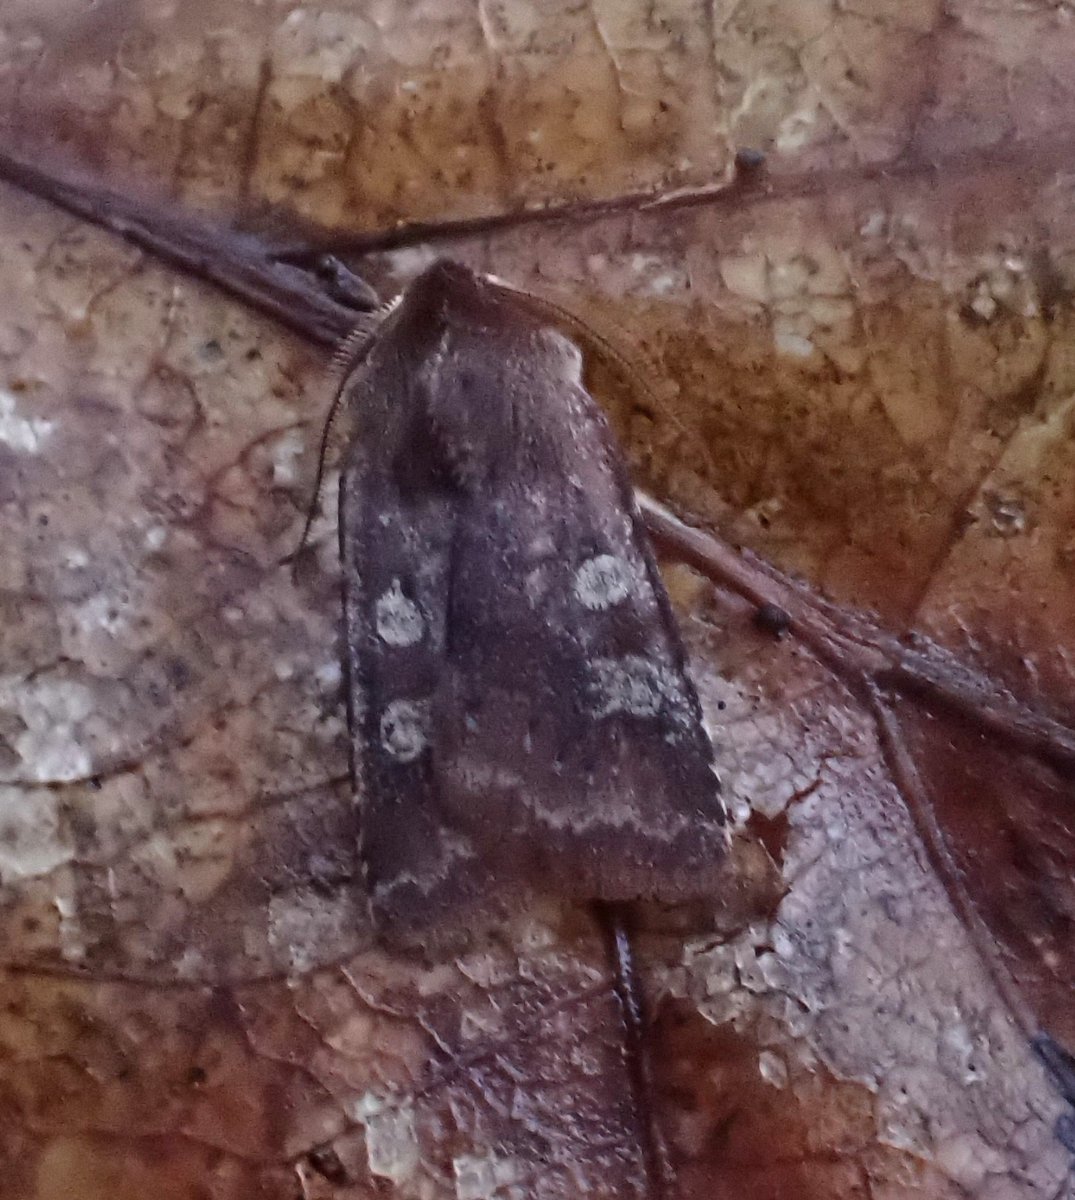 Some nice moths starting to appear. Red Sword-grass from the garden last night and White Marked from Hackfall Woods.